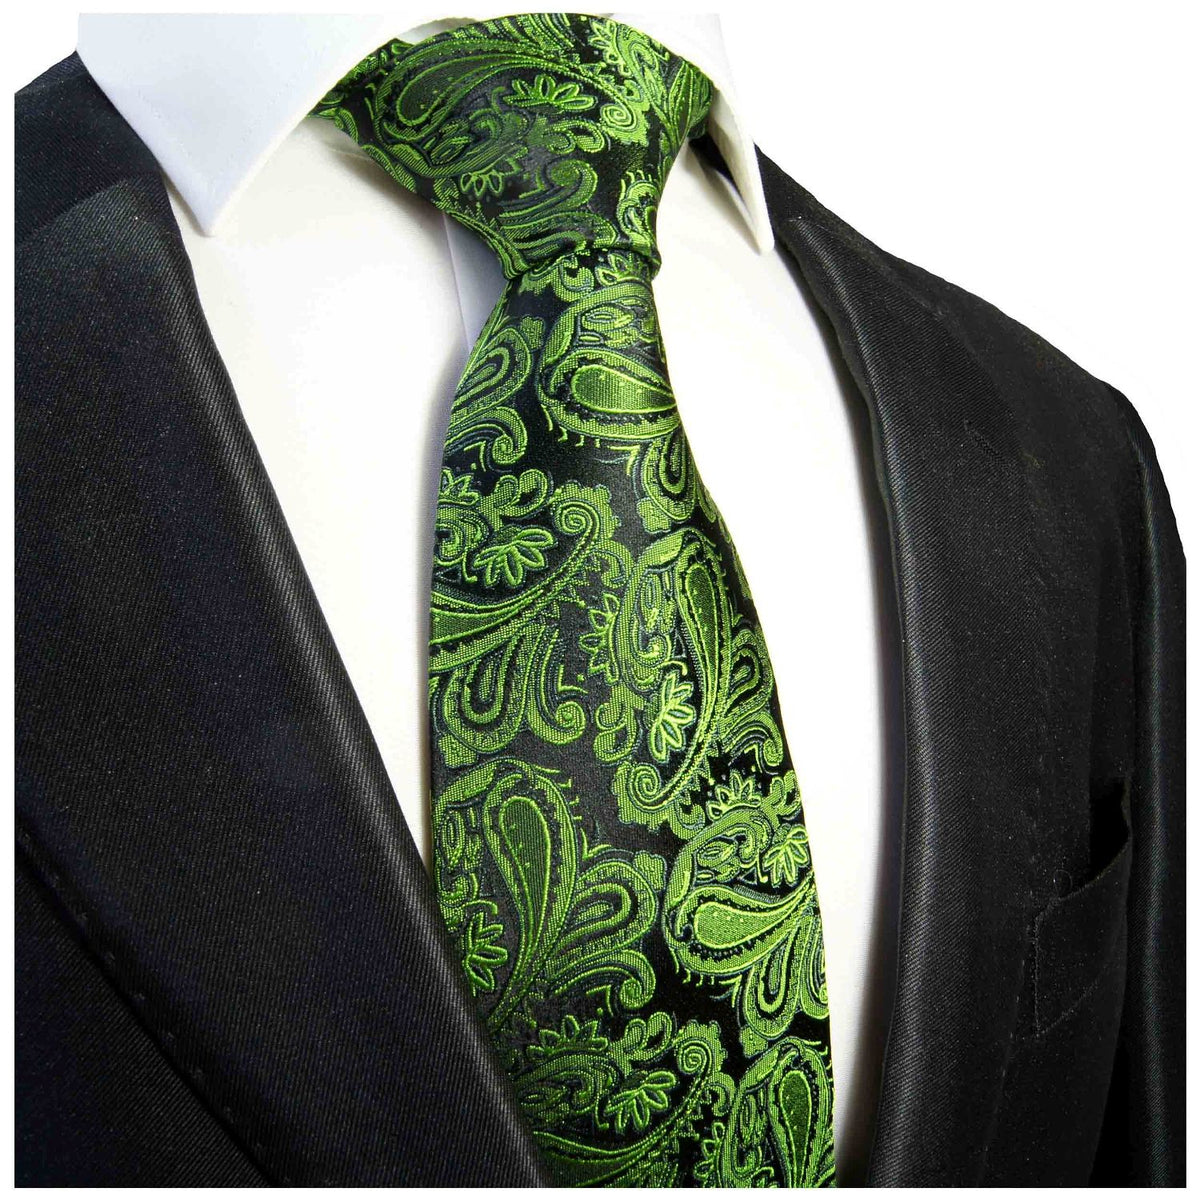 Silk Necktie by Paul Malone in Green and Black Paisley | Paul Malone